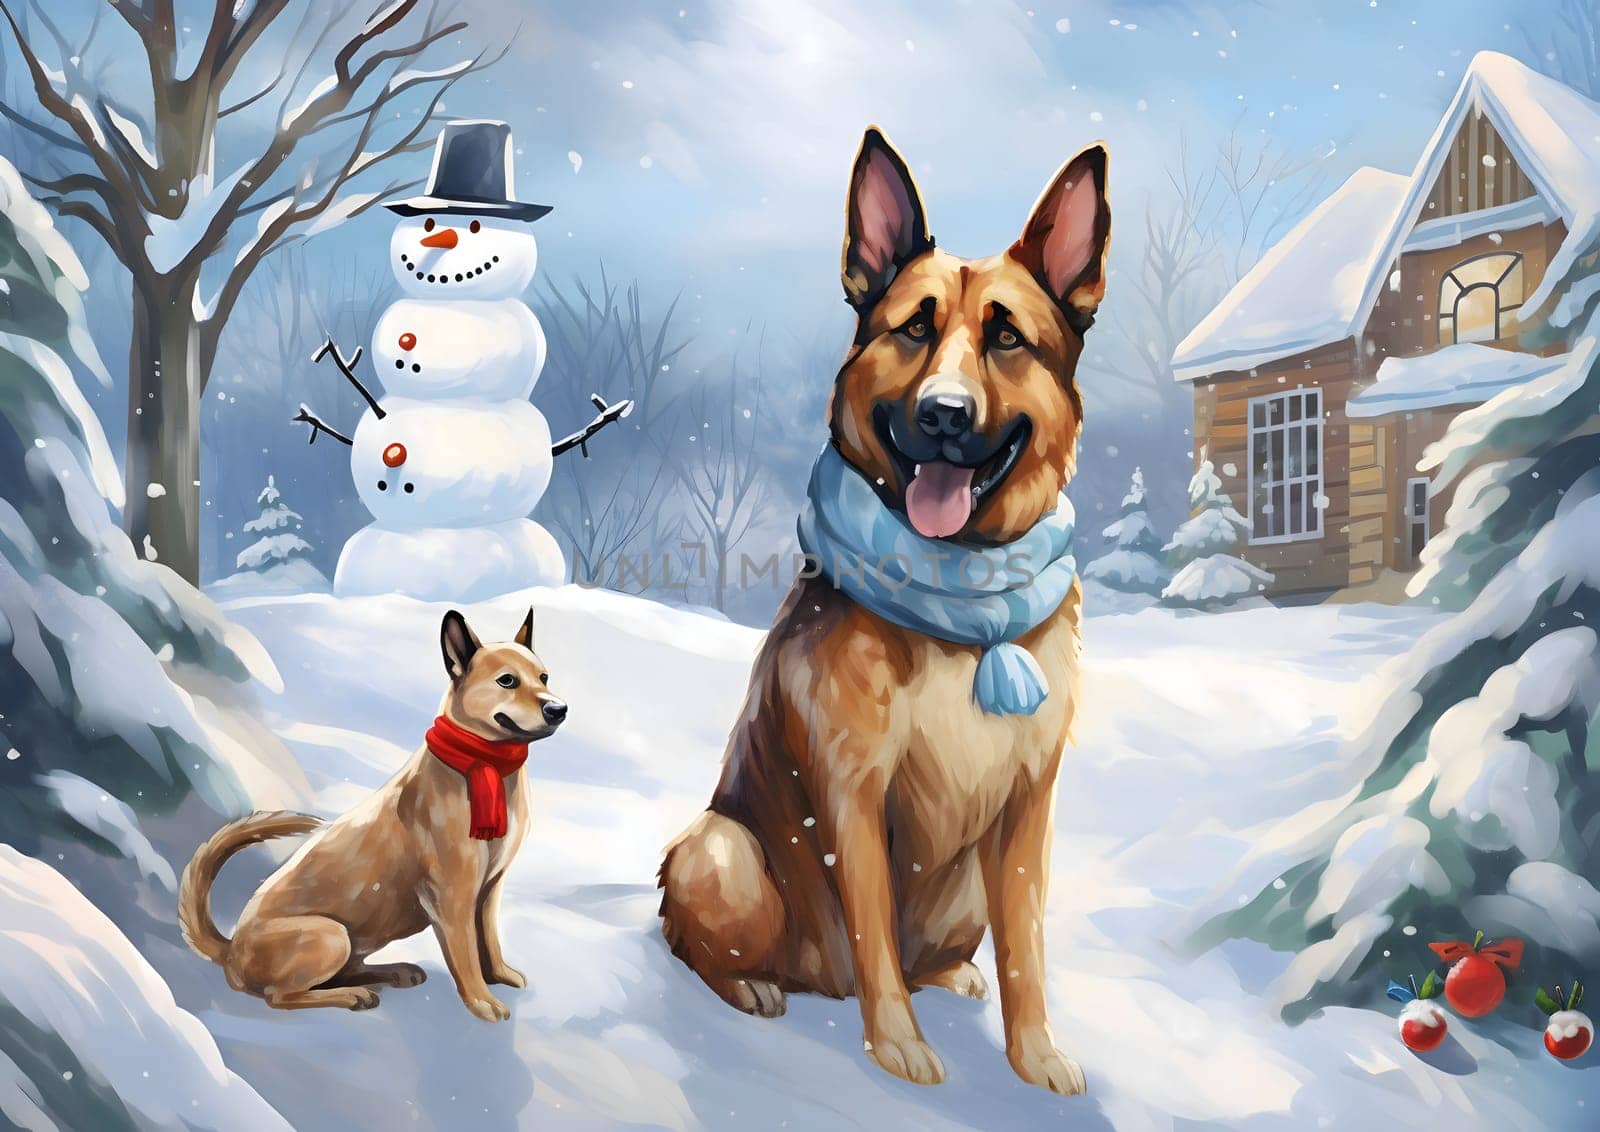 Illustration of two dogs in a Snowy landscape, snowman in the background, Christmas tree house. Christmas card as a symbol of remembrance of the birth of the Savior. by ThemesS